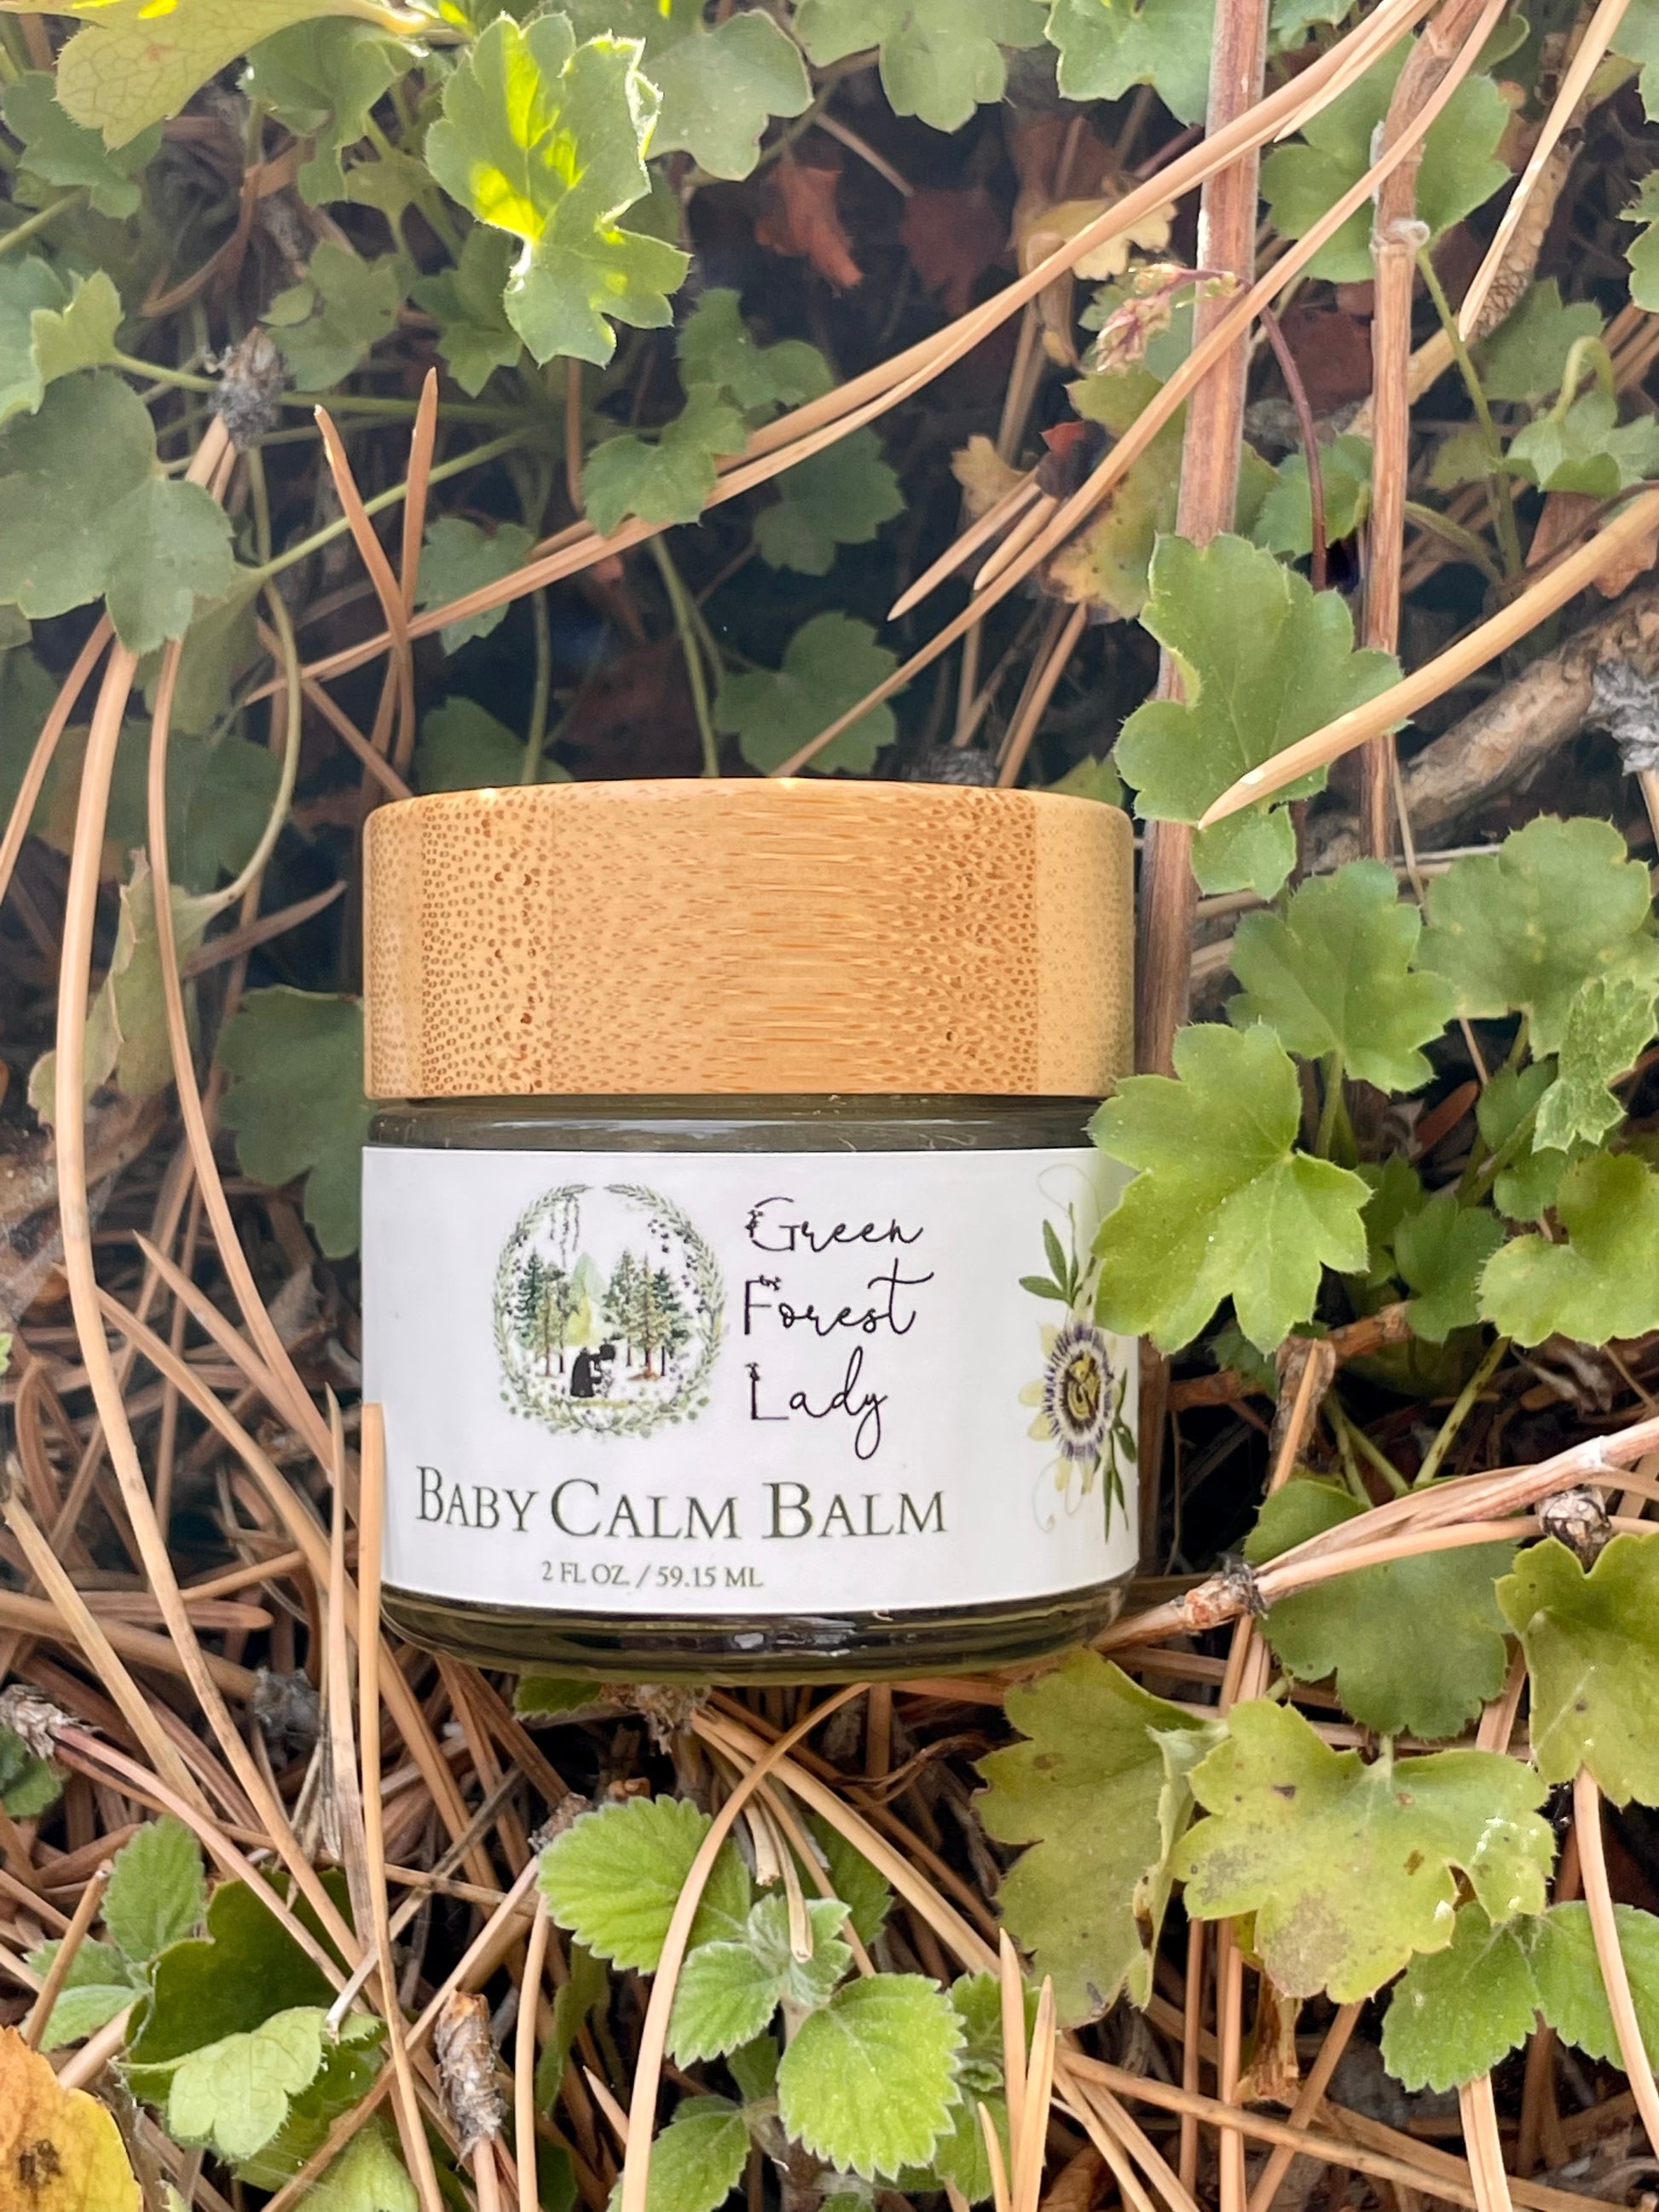 Jar of Baby Calm Balm on foliage in a forest 